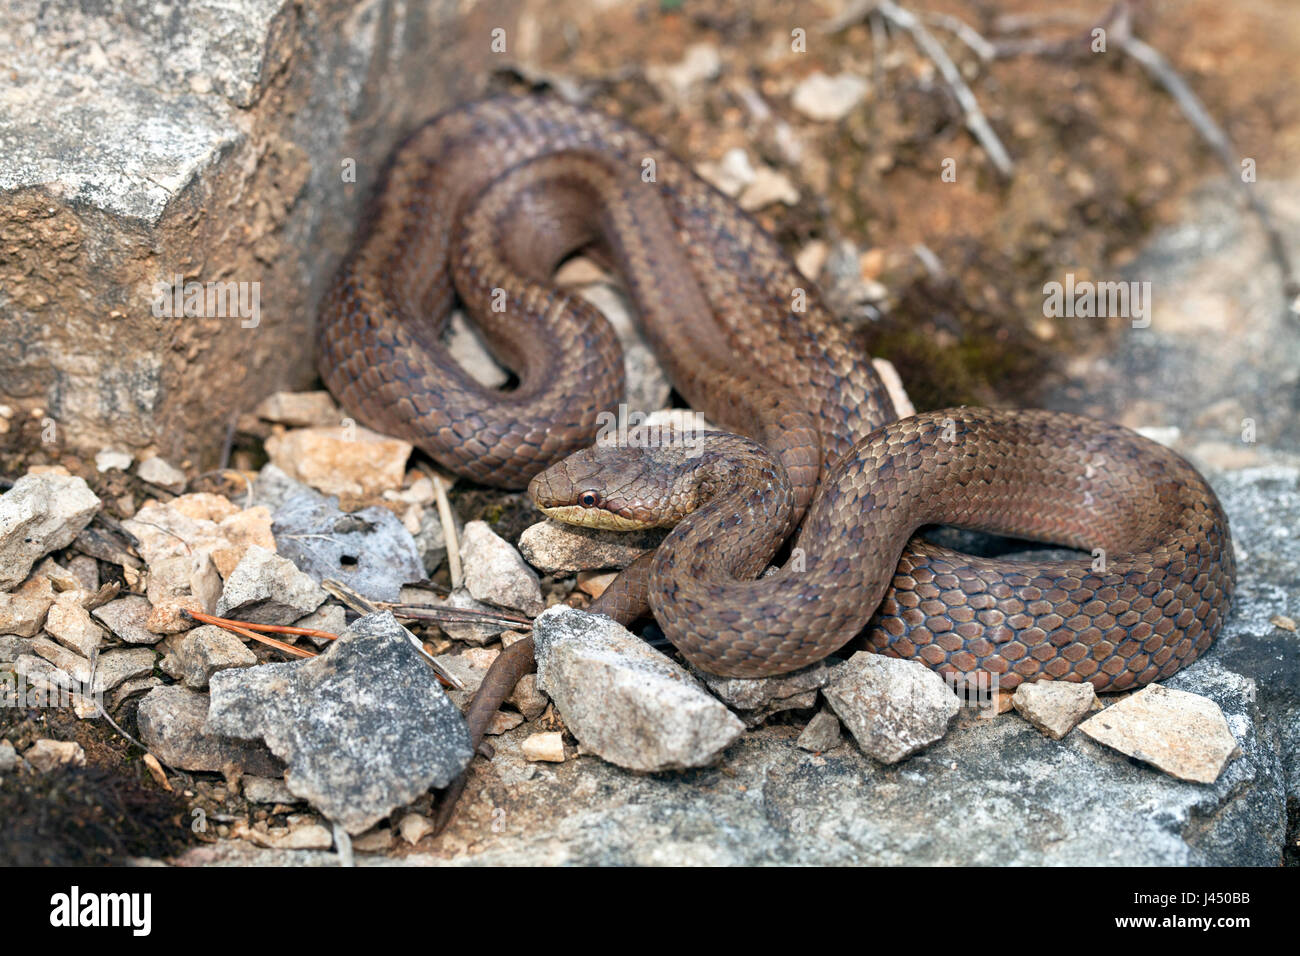 photo of a smooth snake between rocks Stock Photo